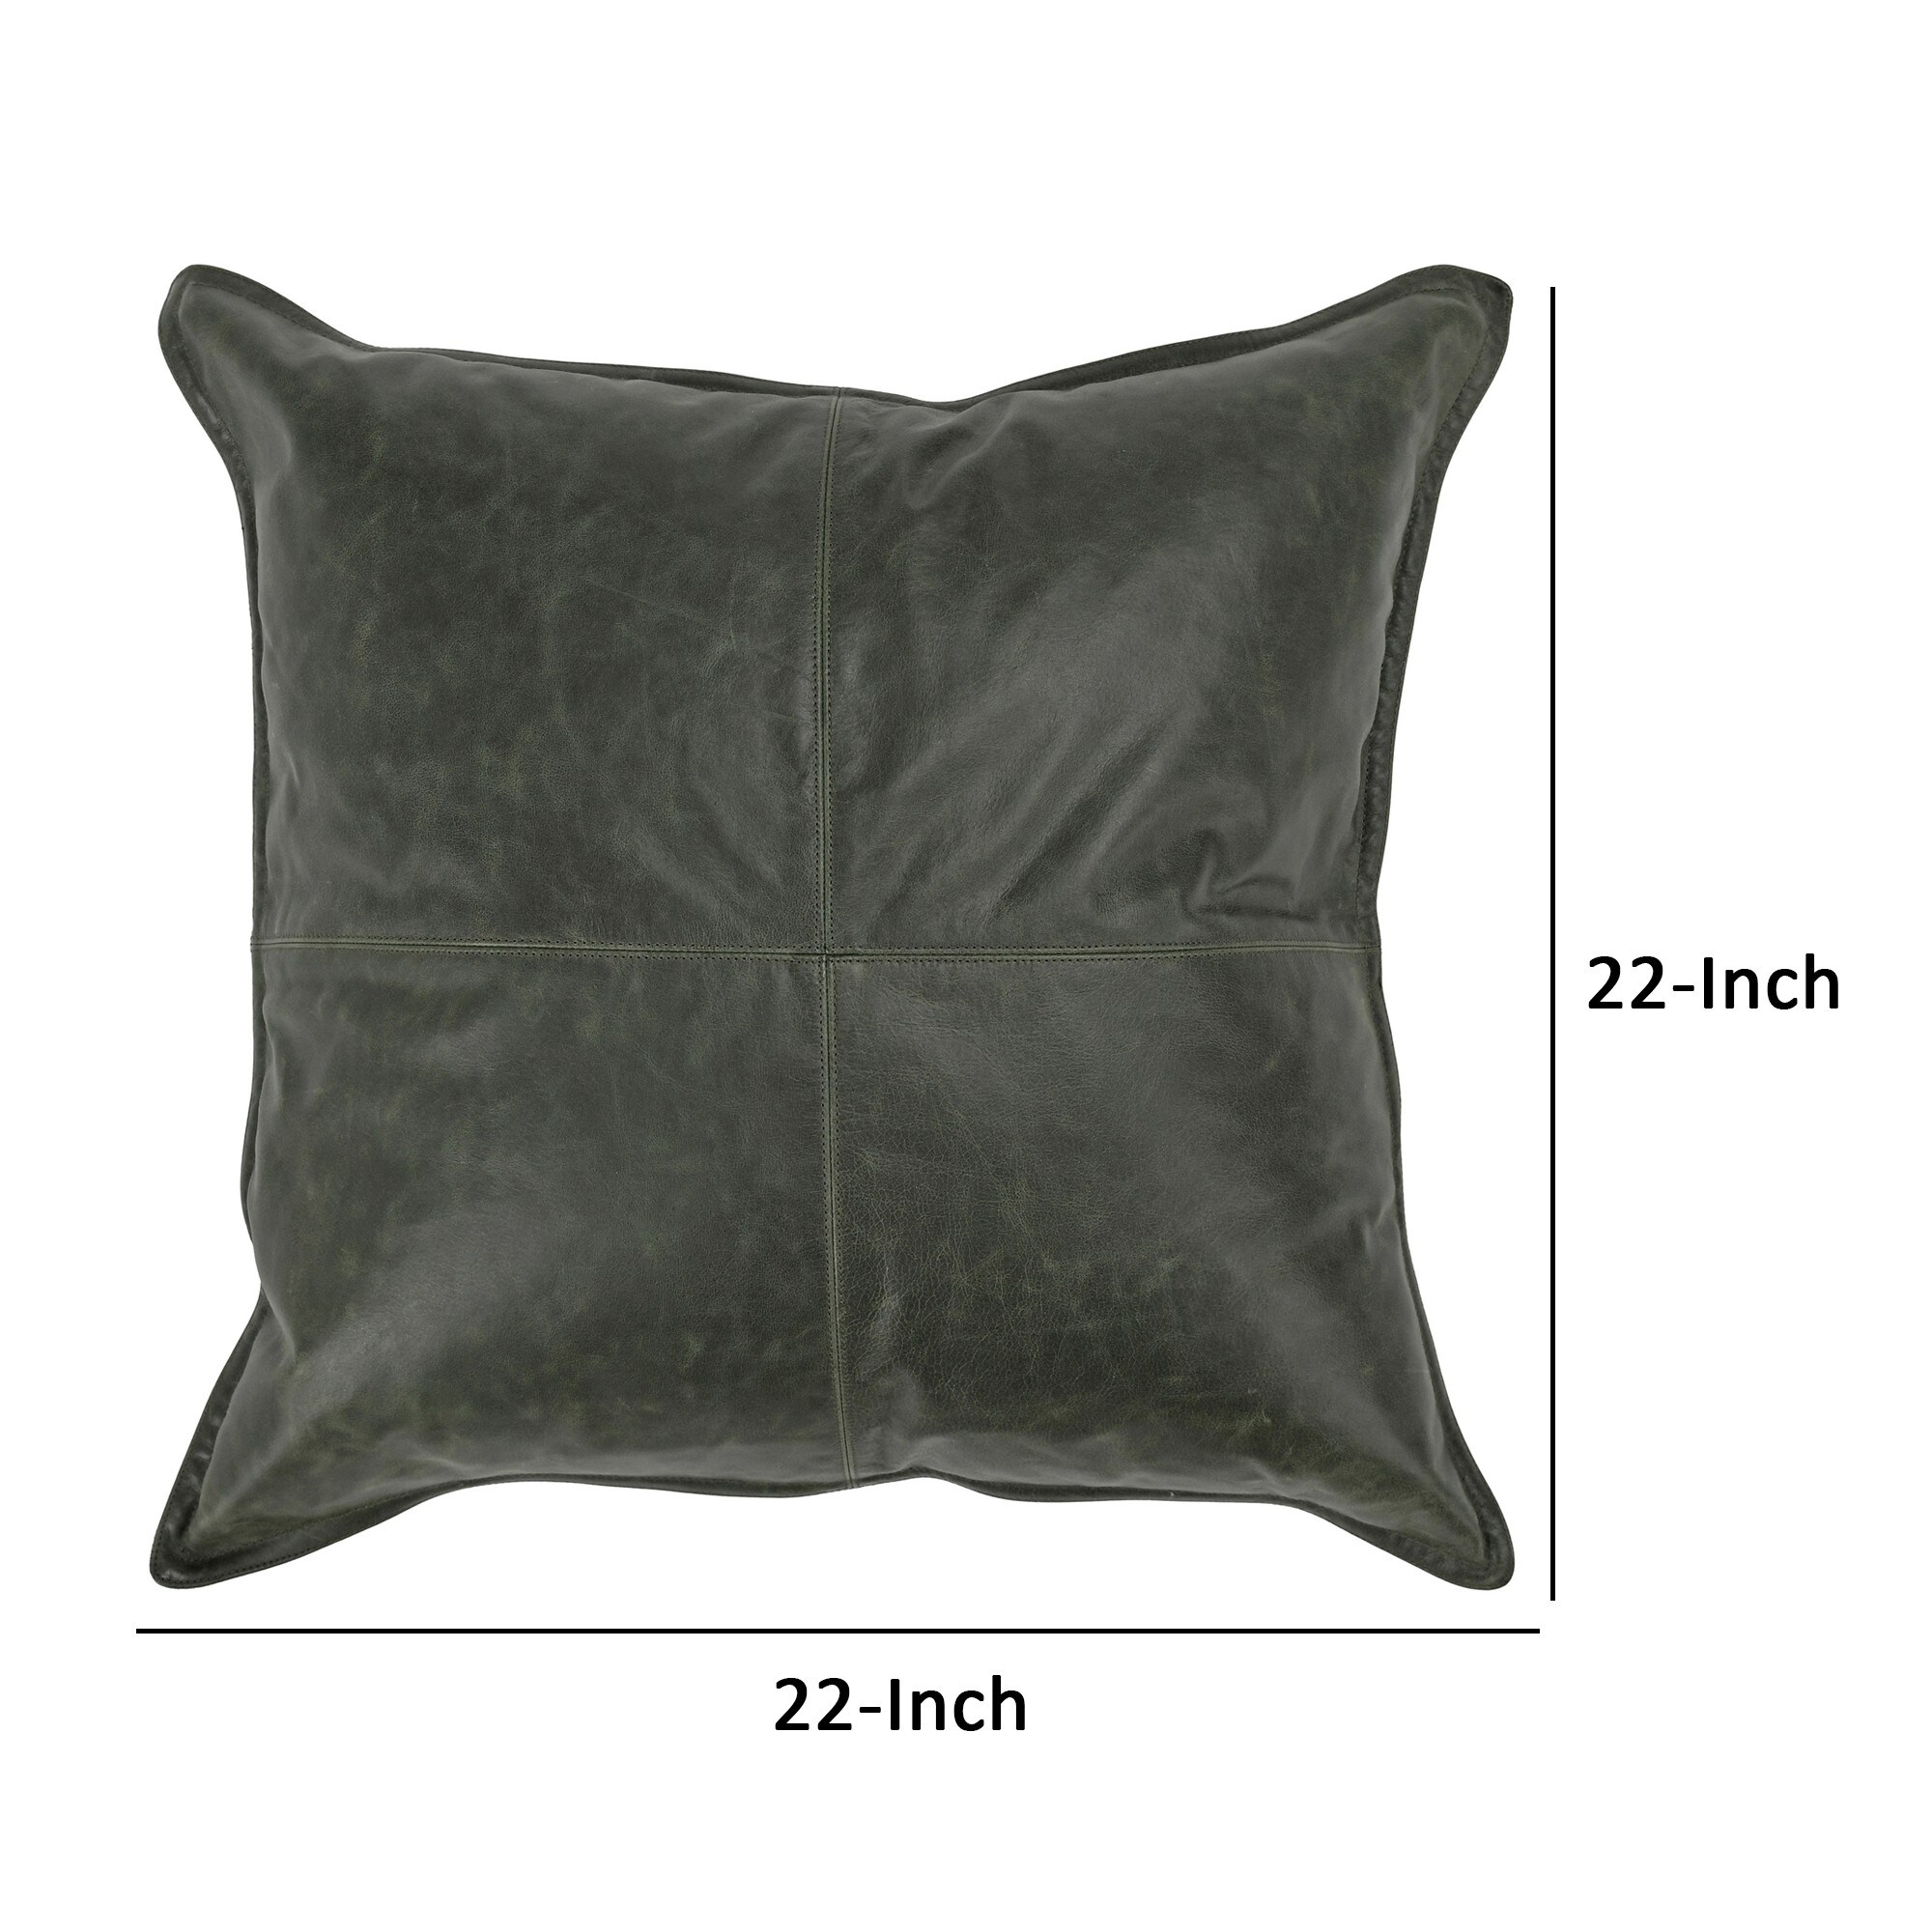 https://ak1.ostkcdn.com/images/products/is/images/direct/f9a1acbc9a49c5f3f6127495a56f9937f8fb2f72/Norm-22-Inch-Square-Accent-Throw-Pillow%2C-Pieced-Design-Forest-Green-Leather.jpg